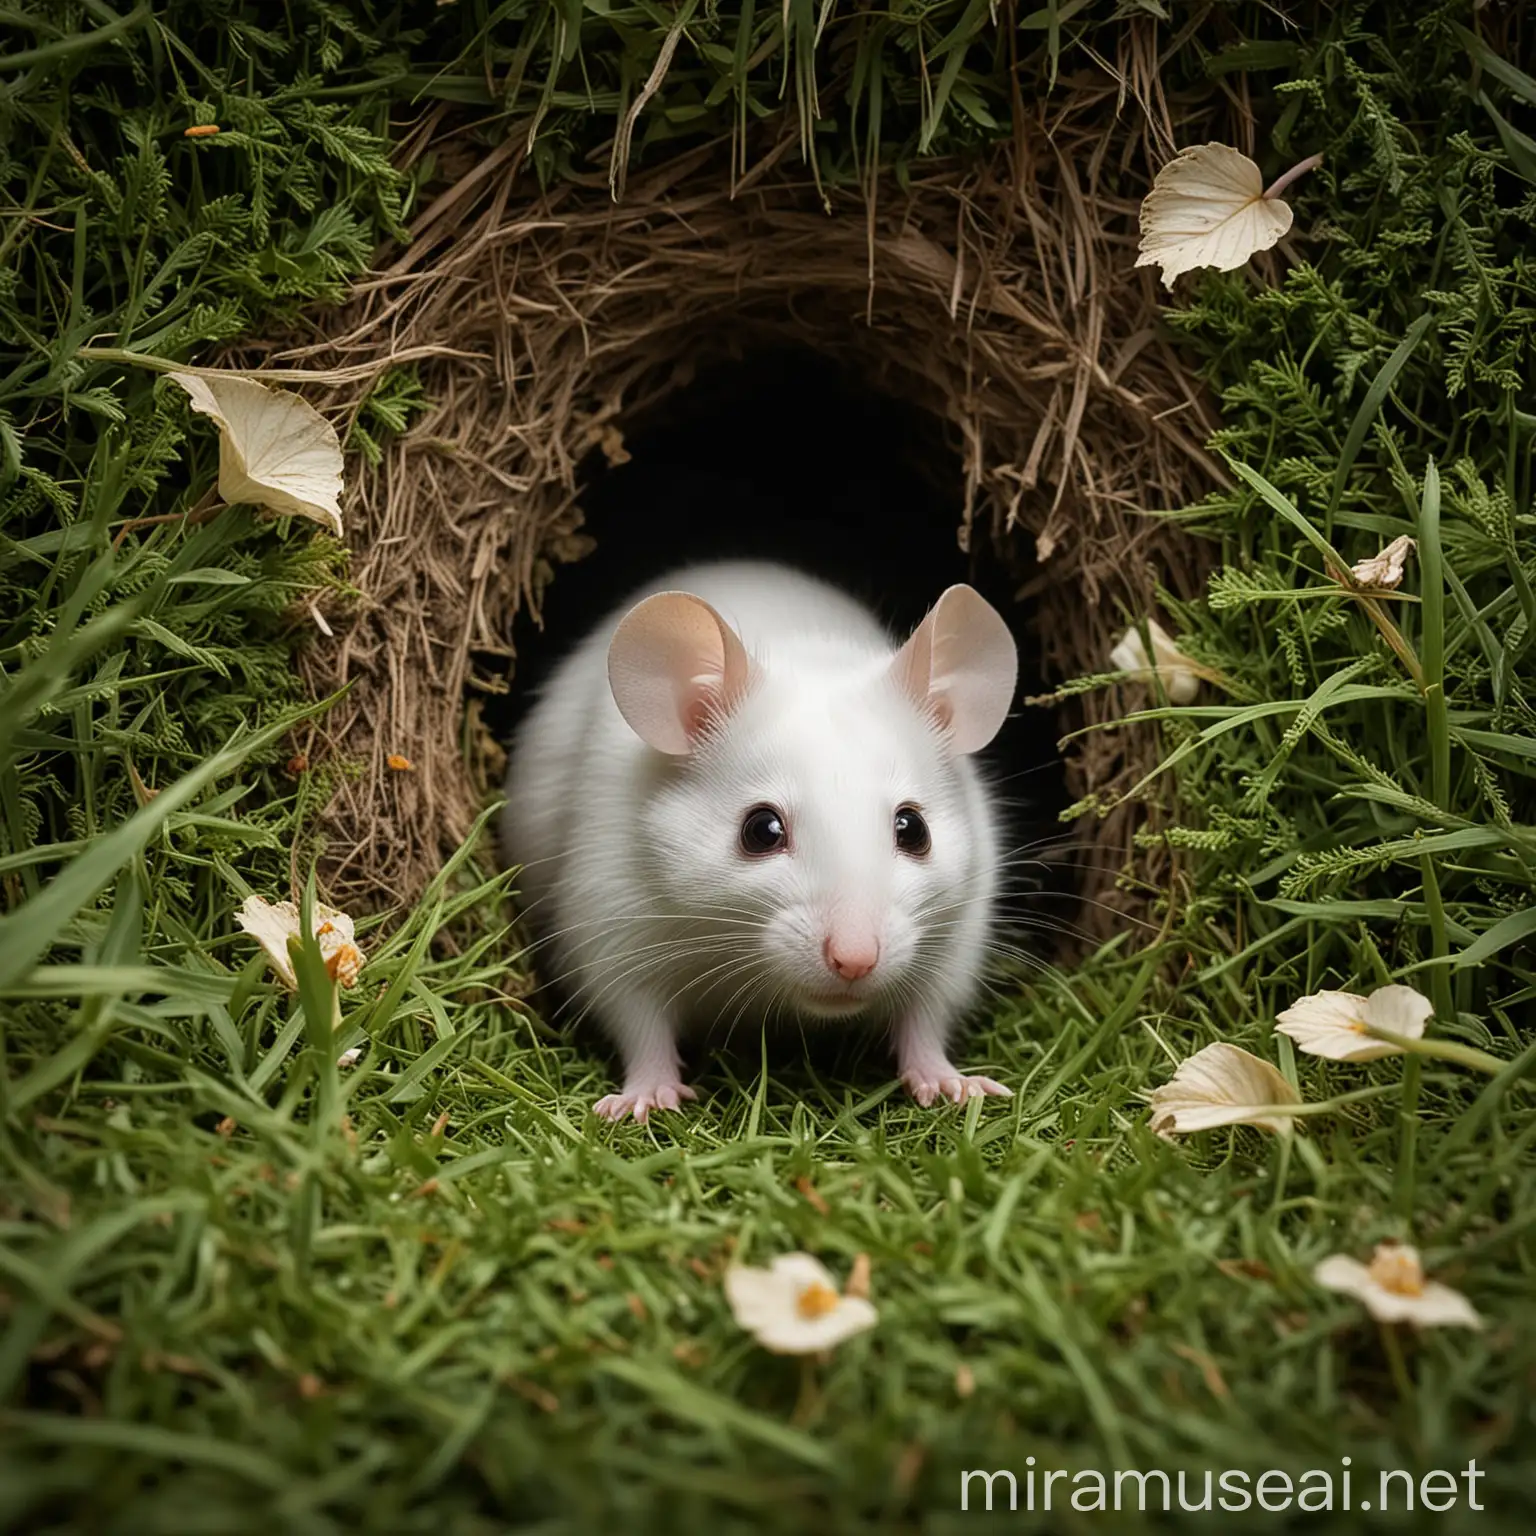 Create a high-quality image of a small white mouse emerging from a hole on a lush green grass field. The mouse should scurry out of the hole, explore the area by moving in various directions, and appear curious and lively. Ensure the scene is well-lit with natural daylight, and the background should have subtle elements like a few scattered leaves or small flowers to enhance the natural setting."